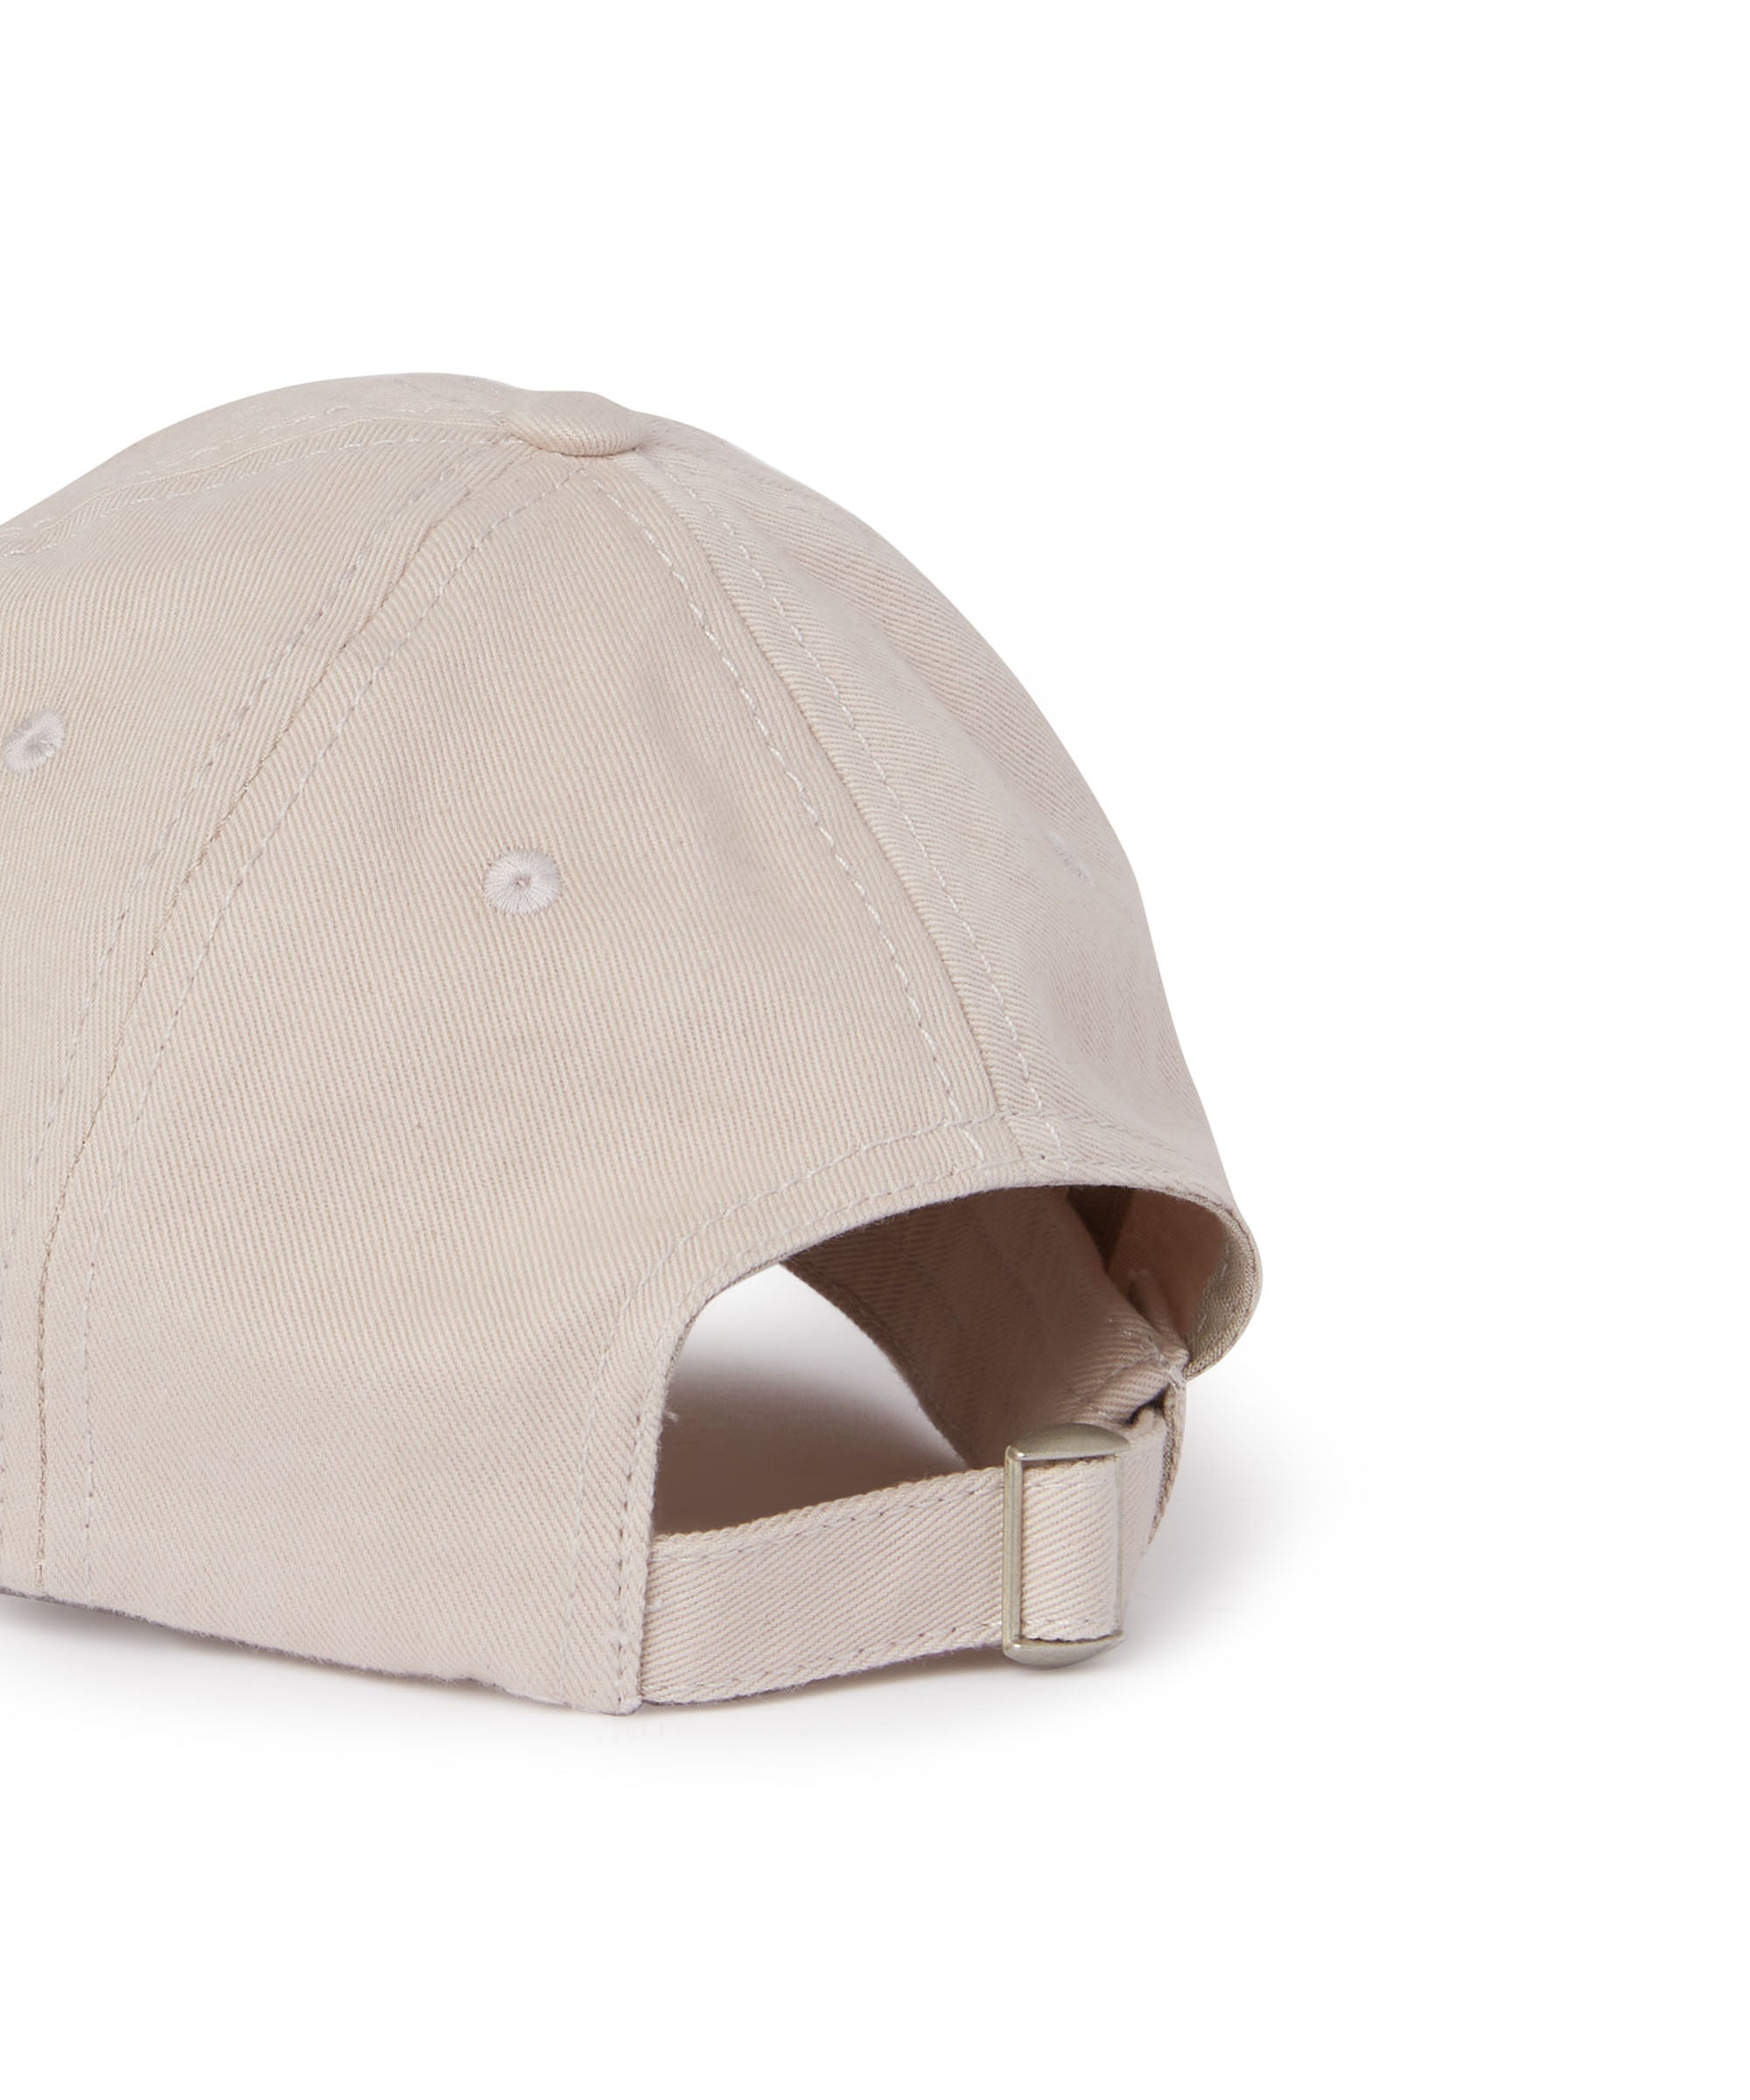 Gabardine cotton baseball cap with distressed effect and embroidered label - 2